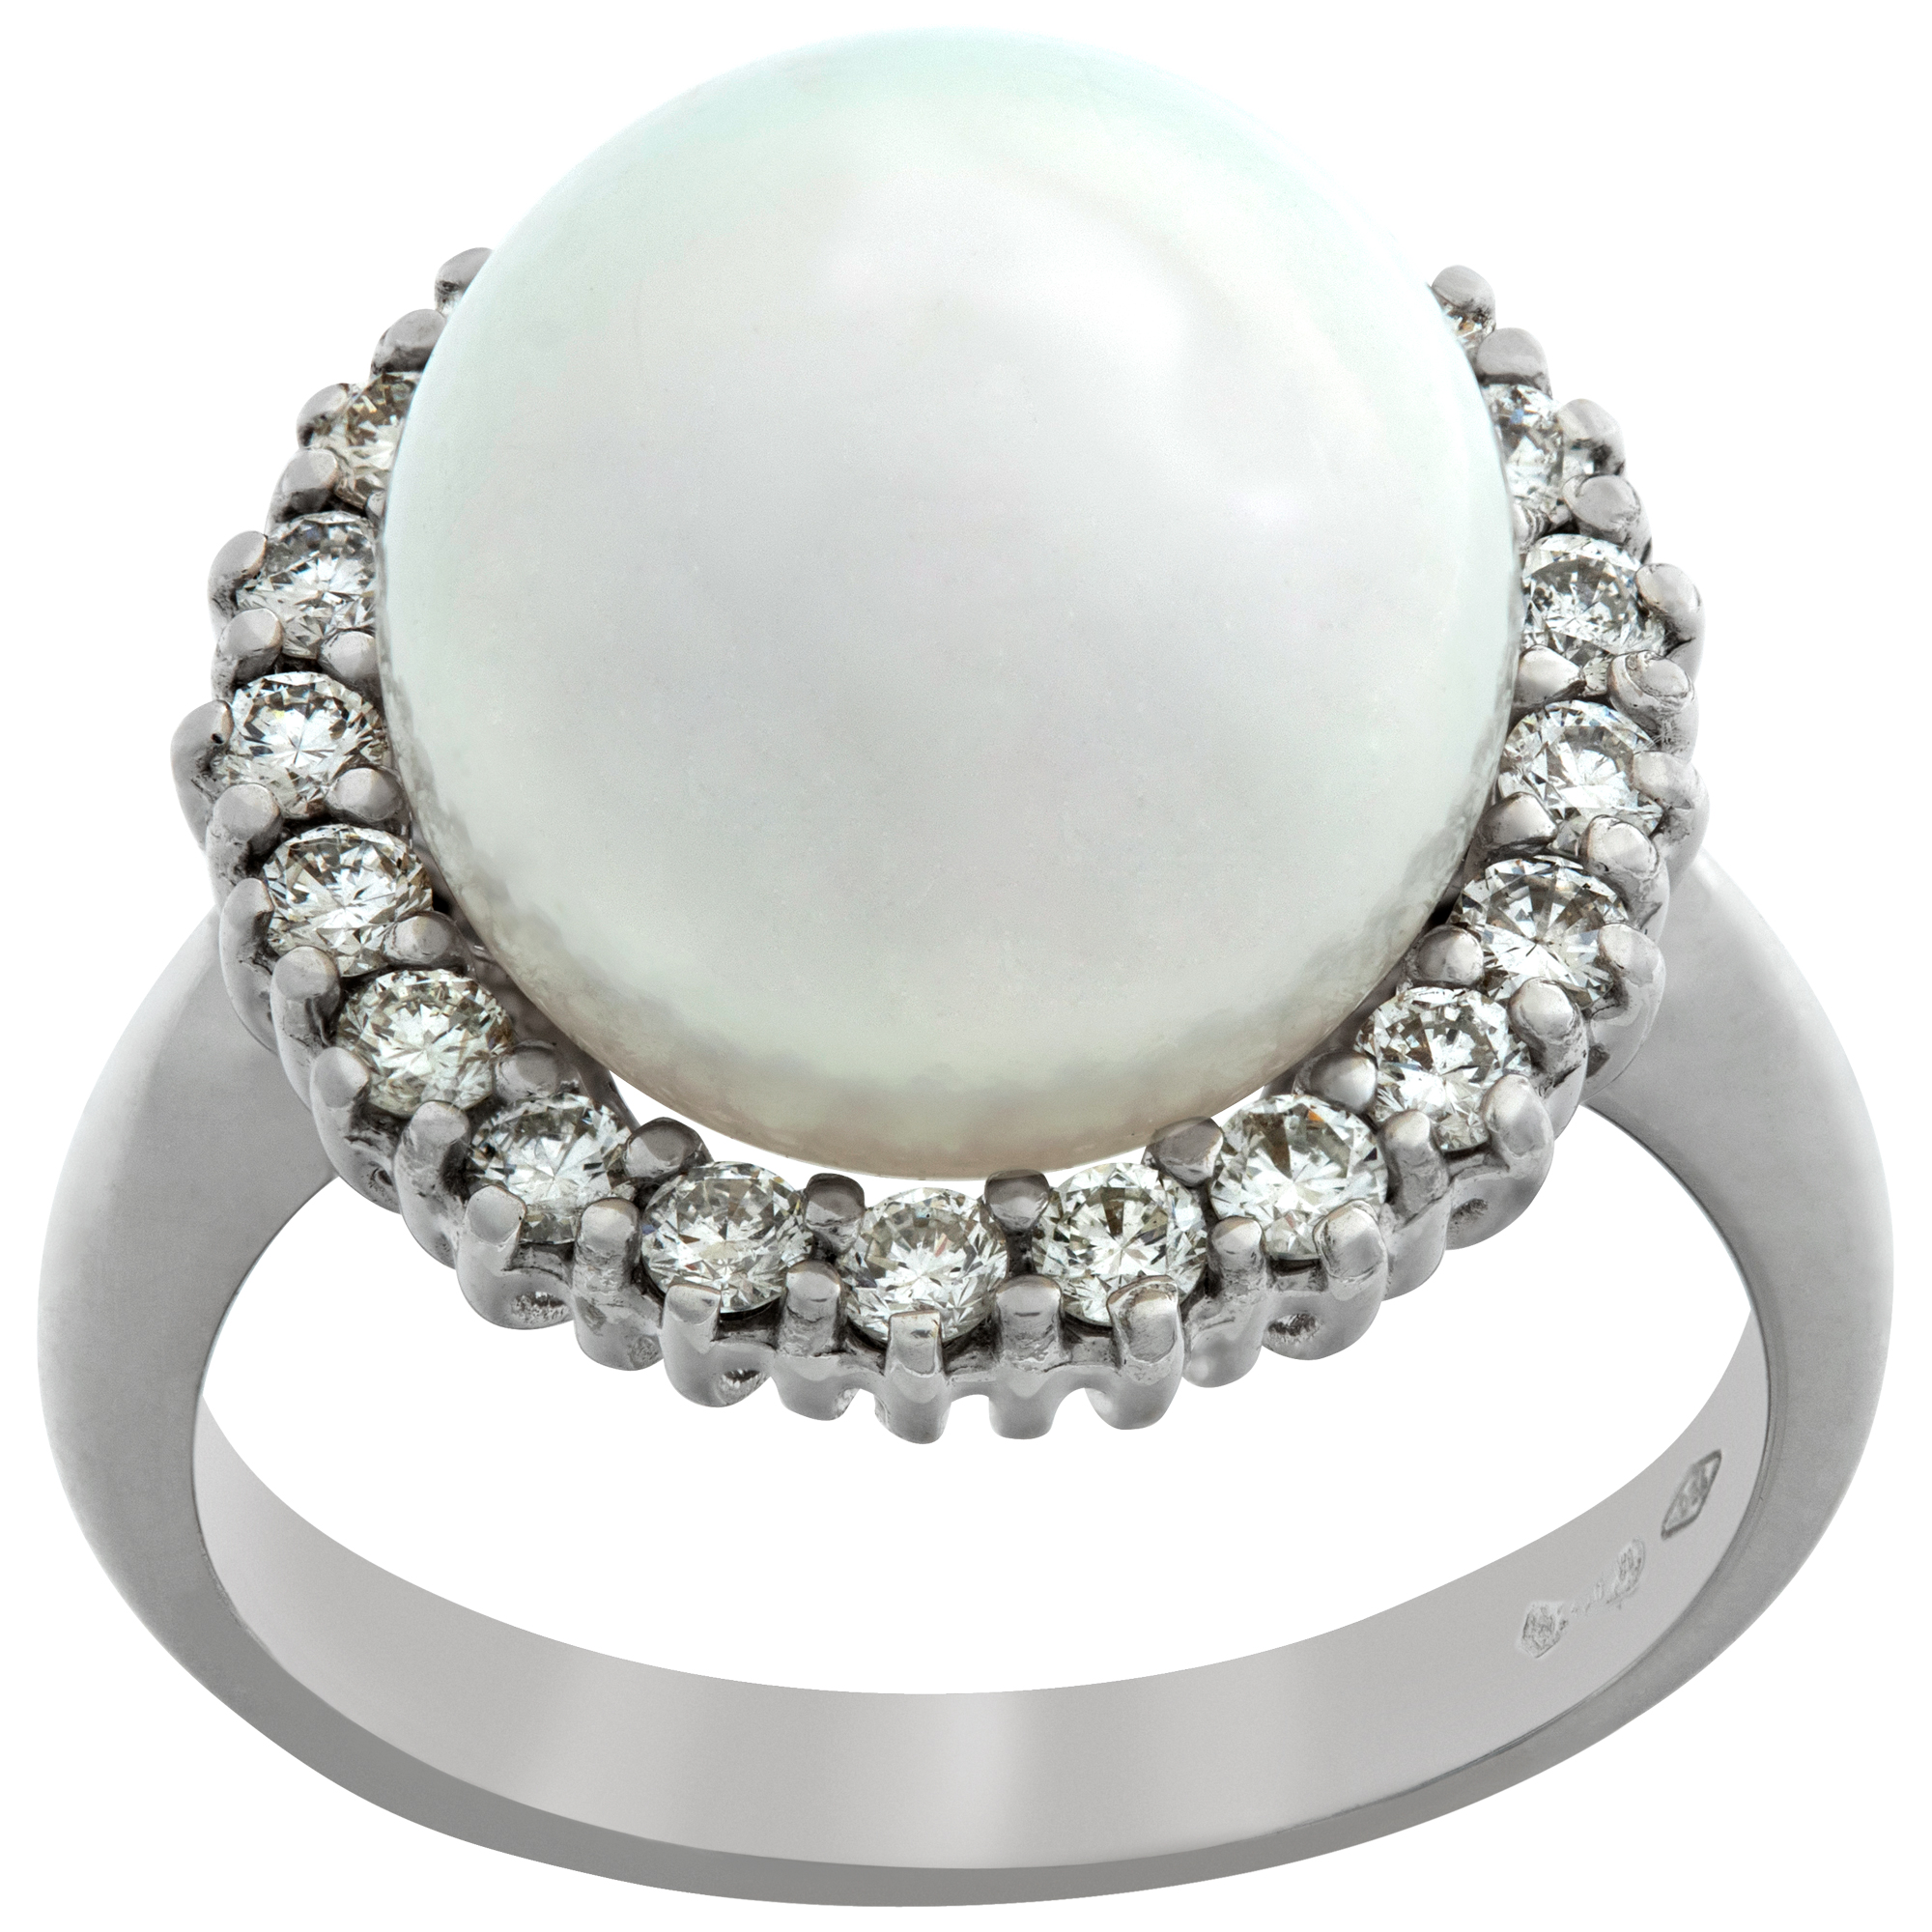 South Sea pearl & diamond ring. 11.6mm pearl, 0.52cts in diamond. Size 6.5